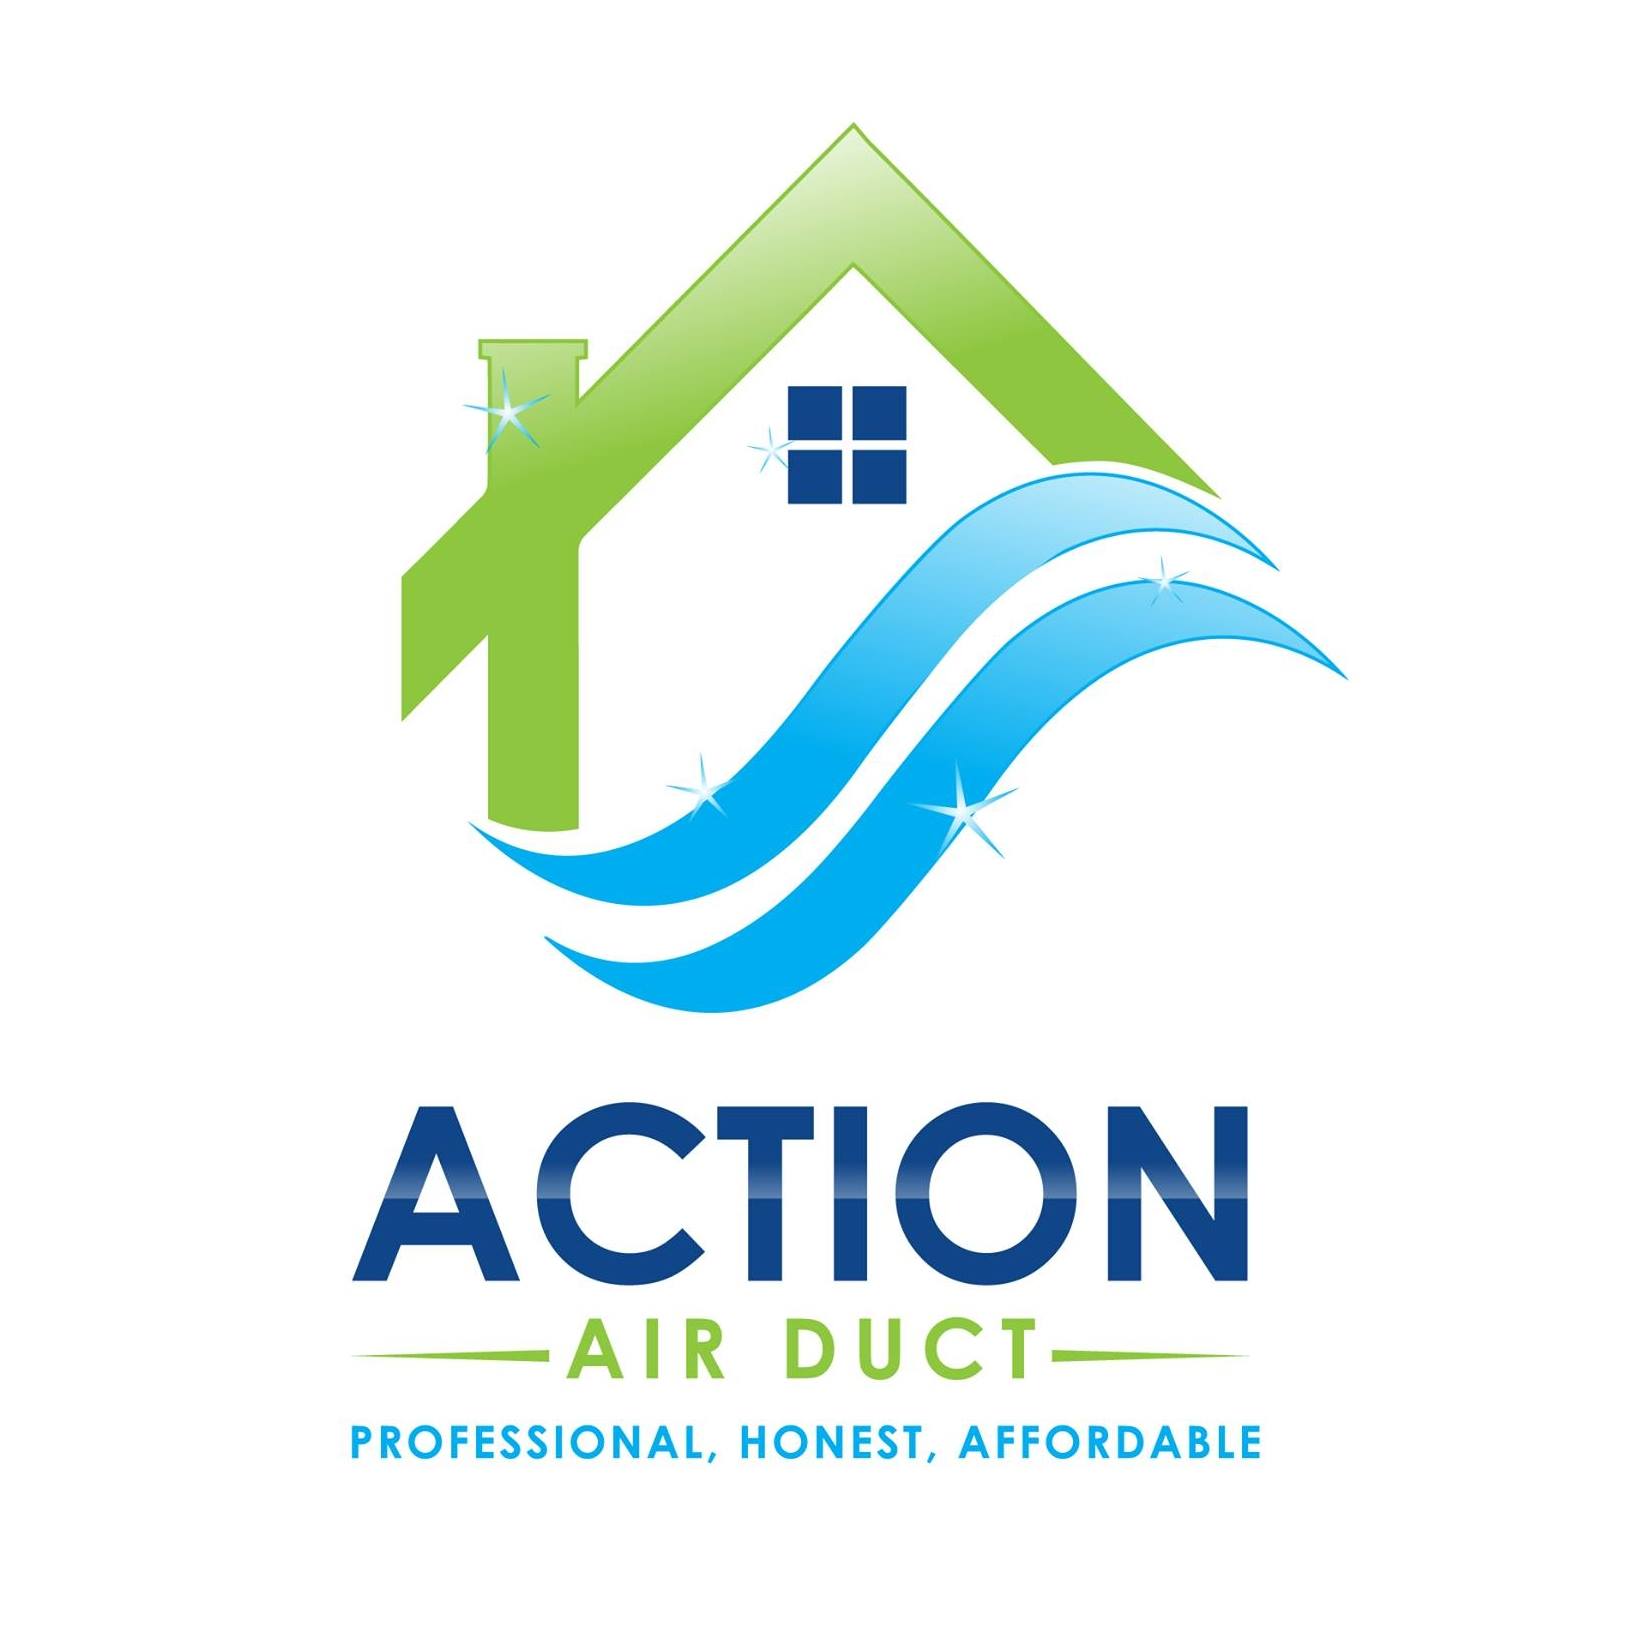 Company logo of Action Air Duct